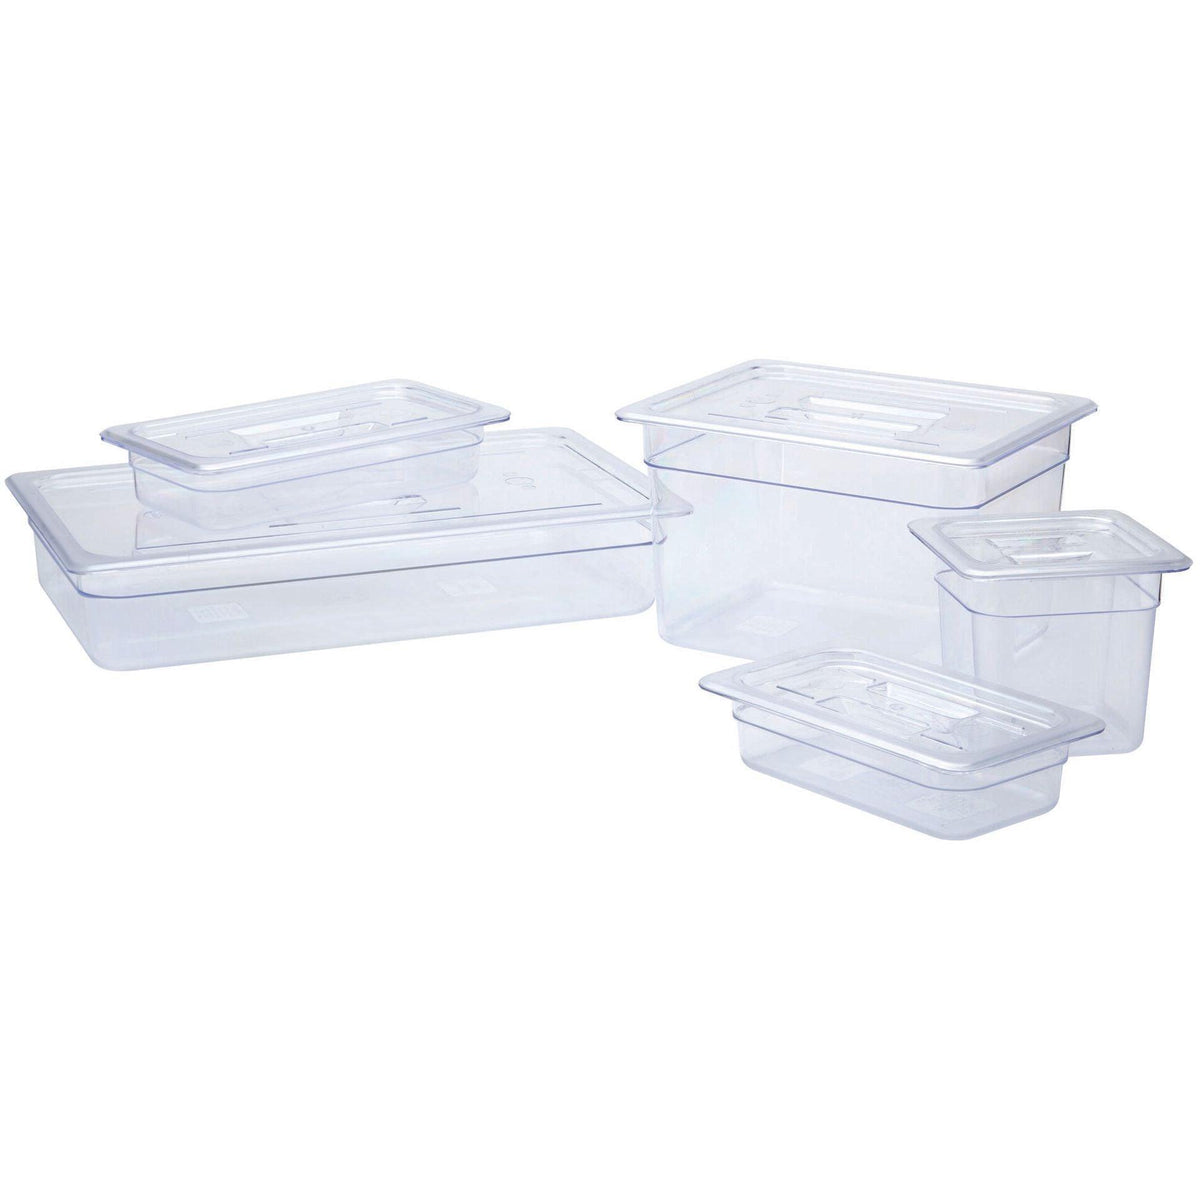 Polycarbonate 1/4GN Universal Handled Lid clear - BESPOKE77